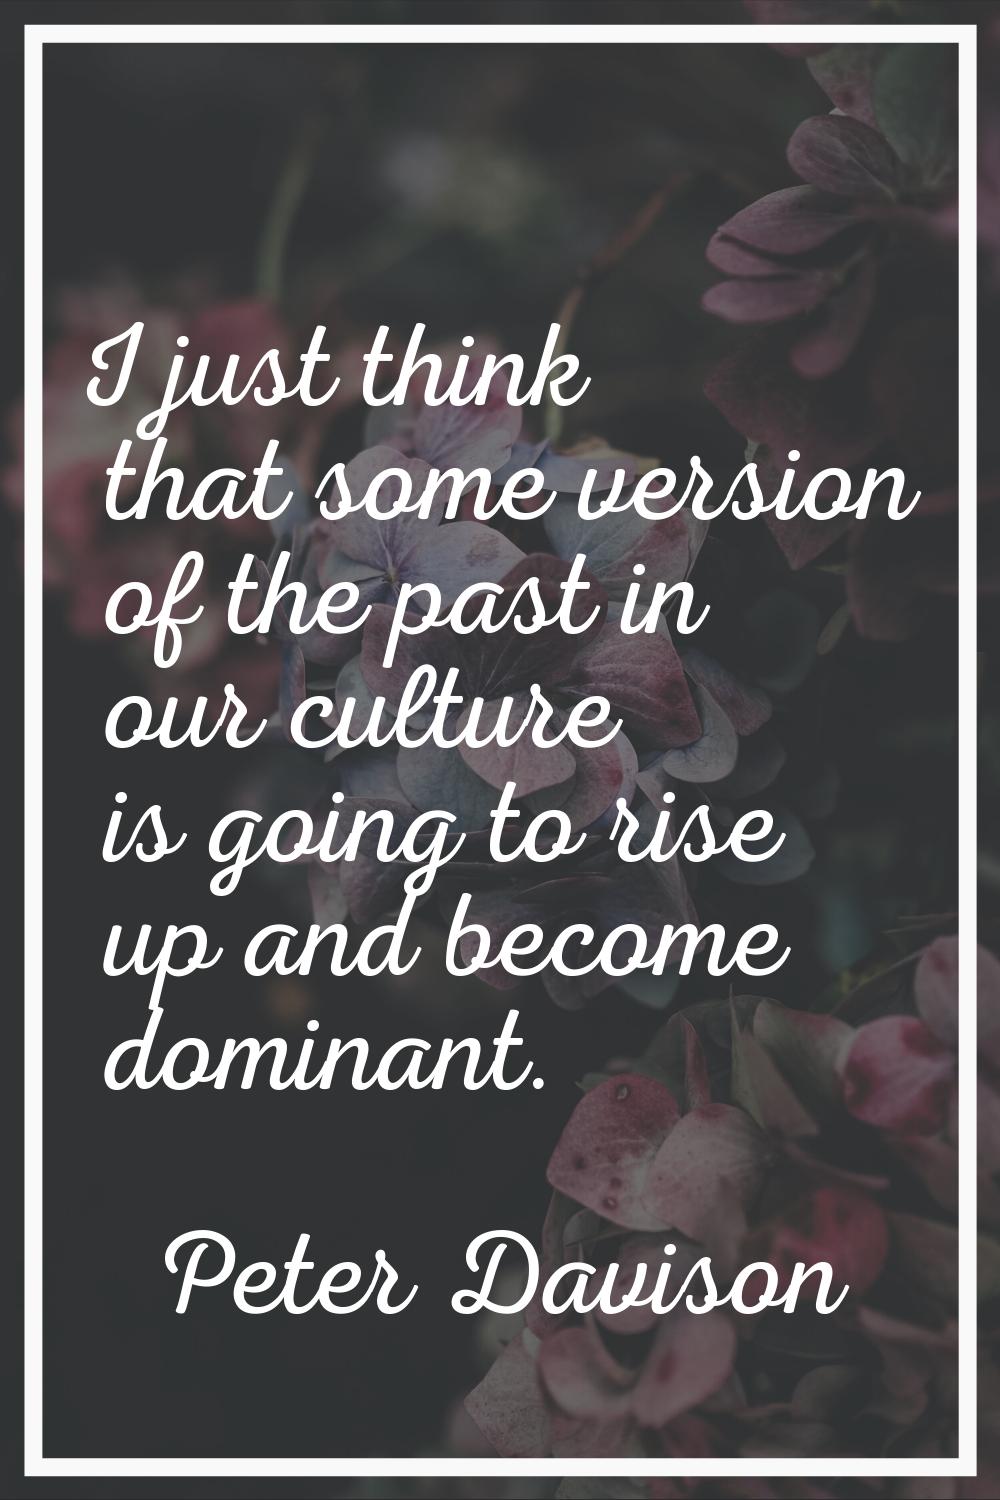 I just think that some version of the past in our culture is going to rise up and become dominant.